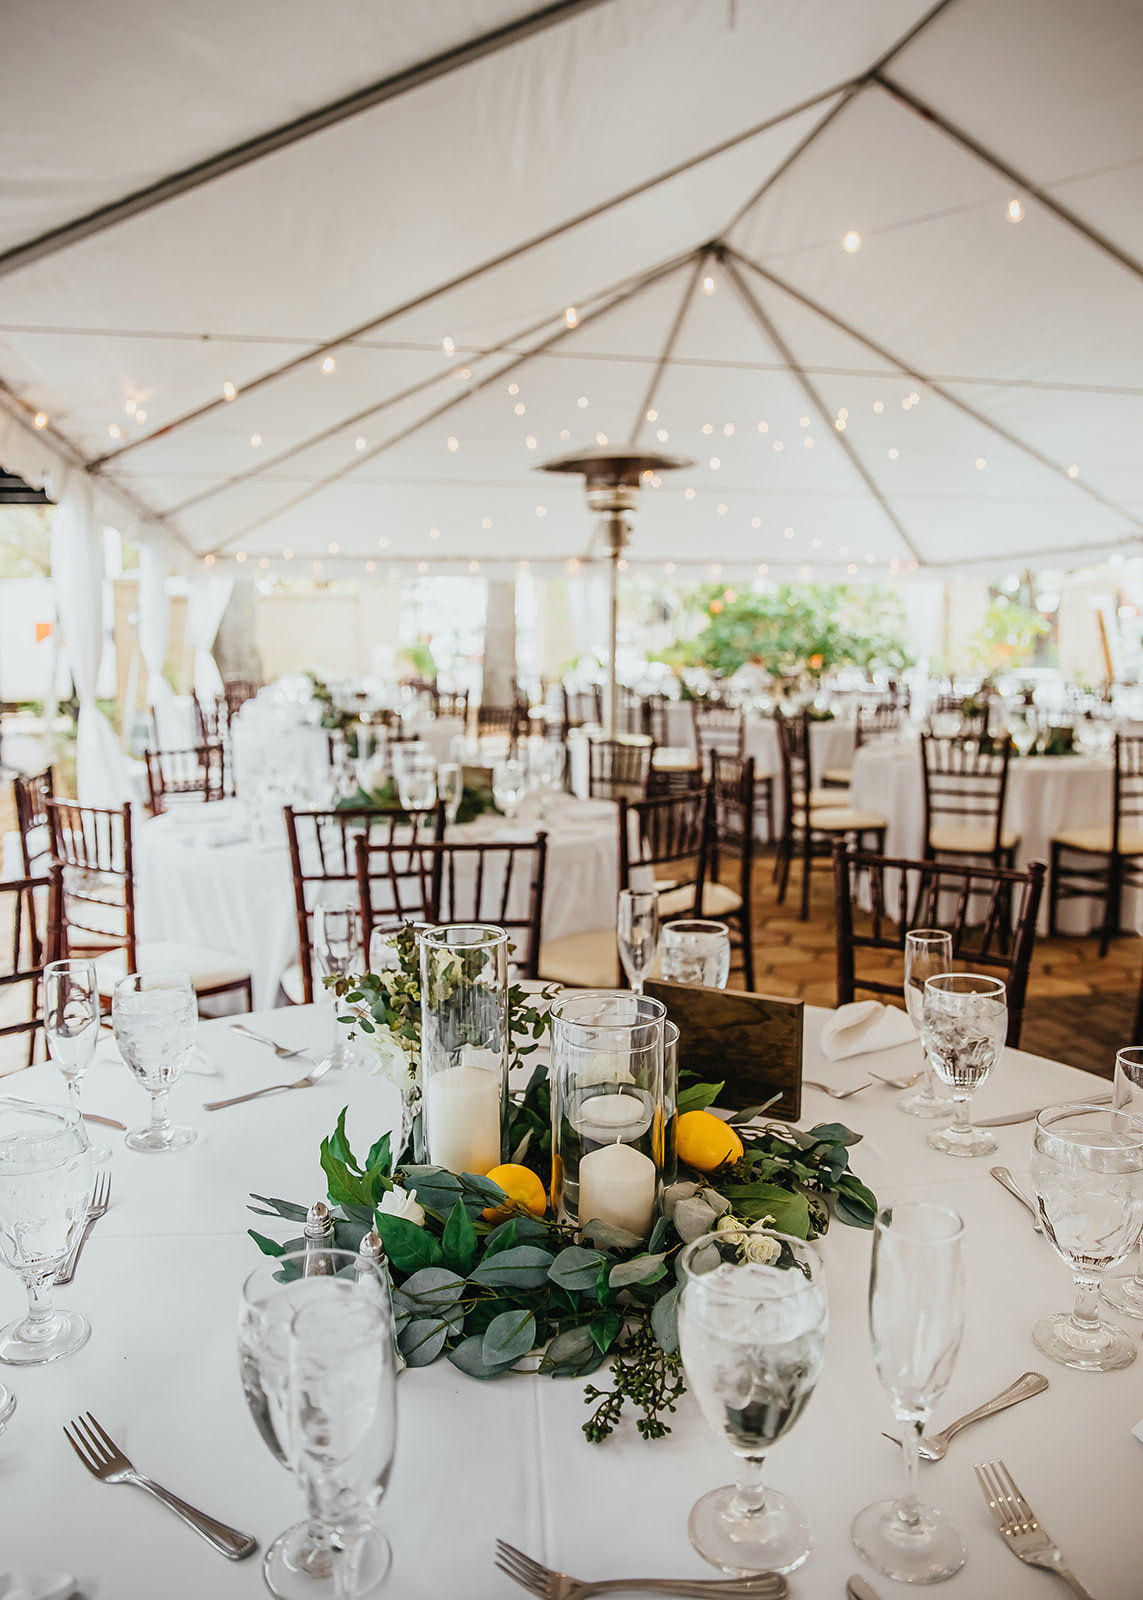 Outdoor Garden Wedding Reception Tent with Canopy String Lights | Round White Tables with Mahogany Wood Chiavari Chairs and Greenery Wreath Centerpieces with Lemons and Hurricane Pillar Candles by Tampa Wedding Florist Monarch Events and Designs